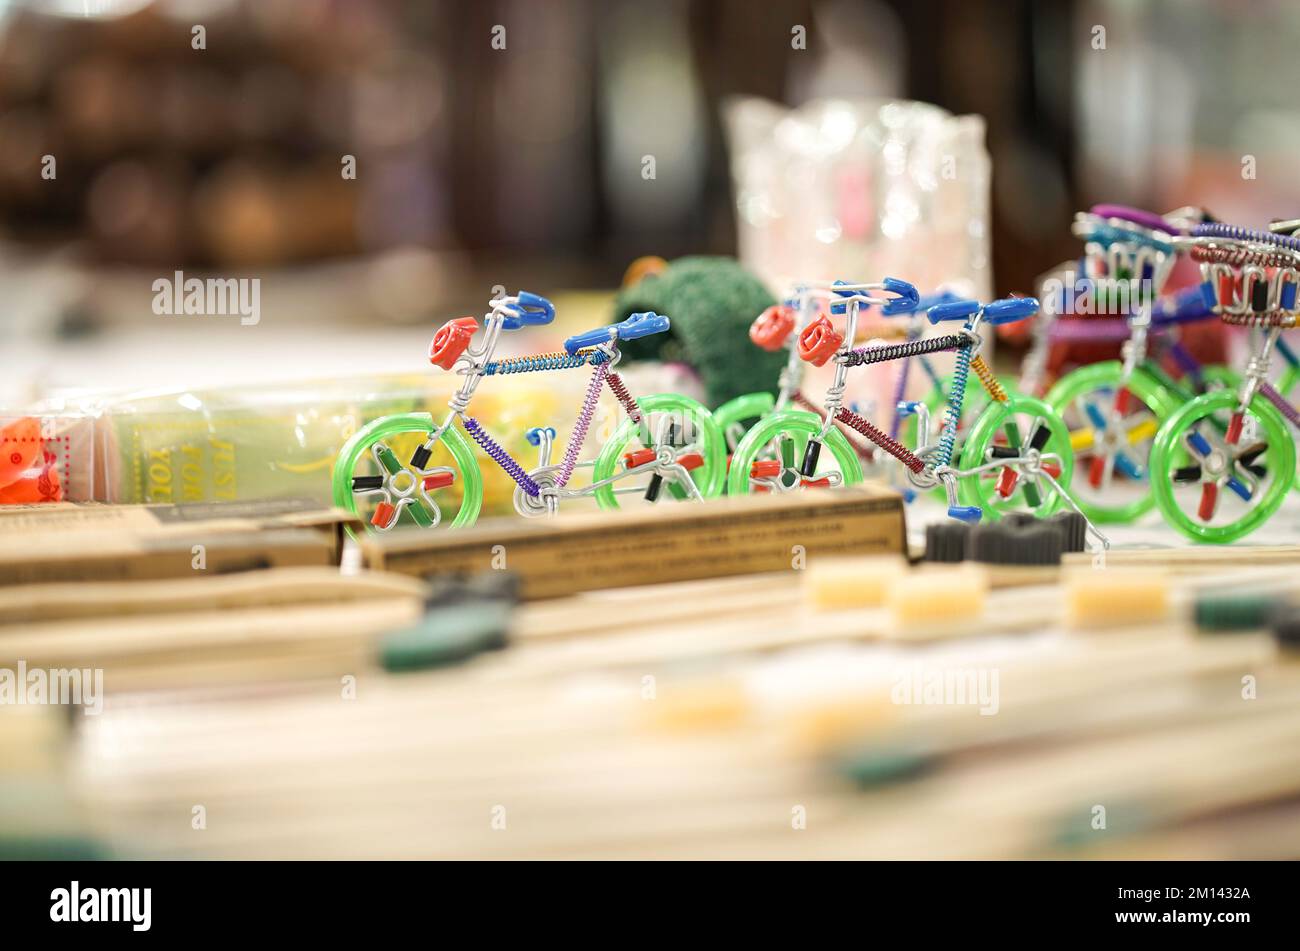 A green color cycle toy showpiece handmade with aluminium children toys in green color selling in market, fair, mall, or store Stock Photo